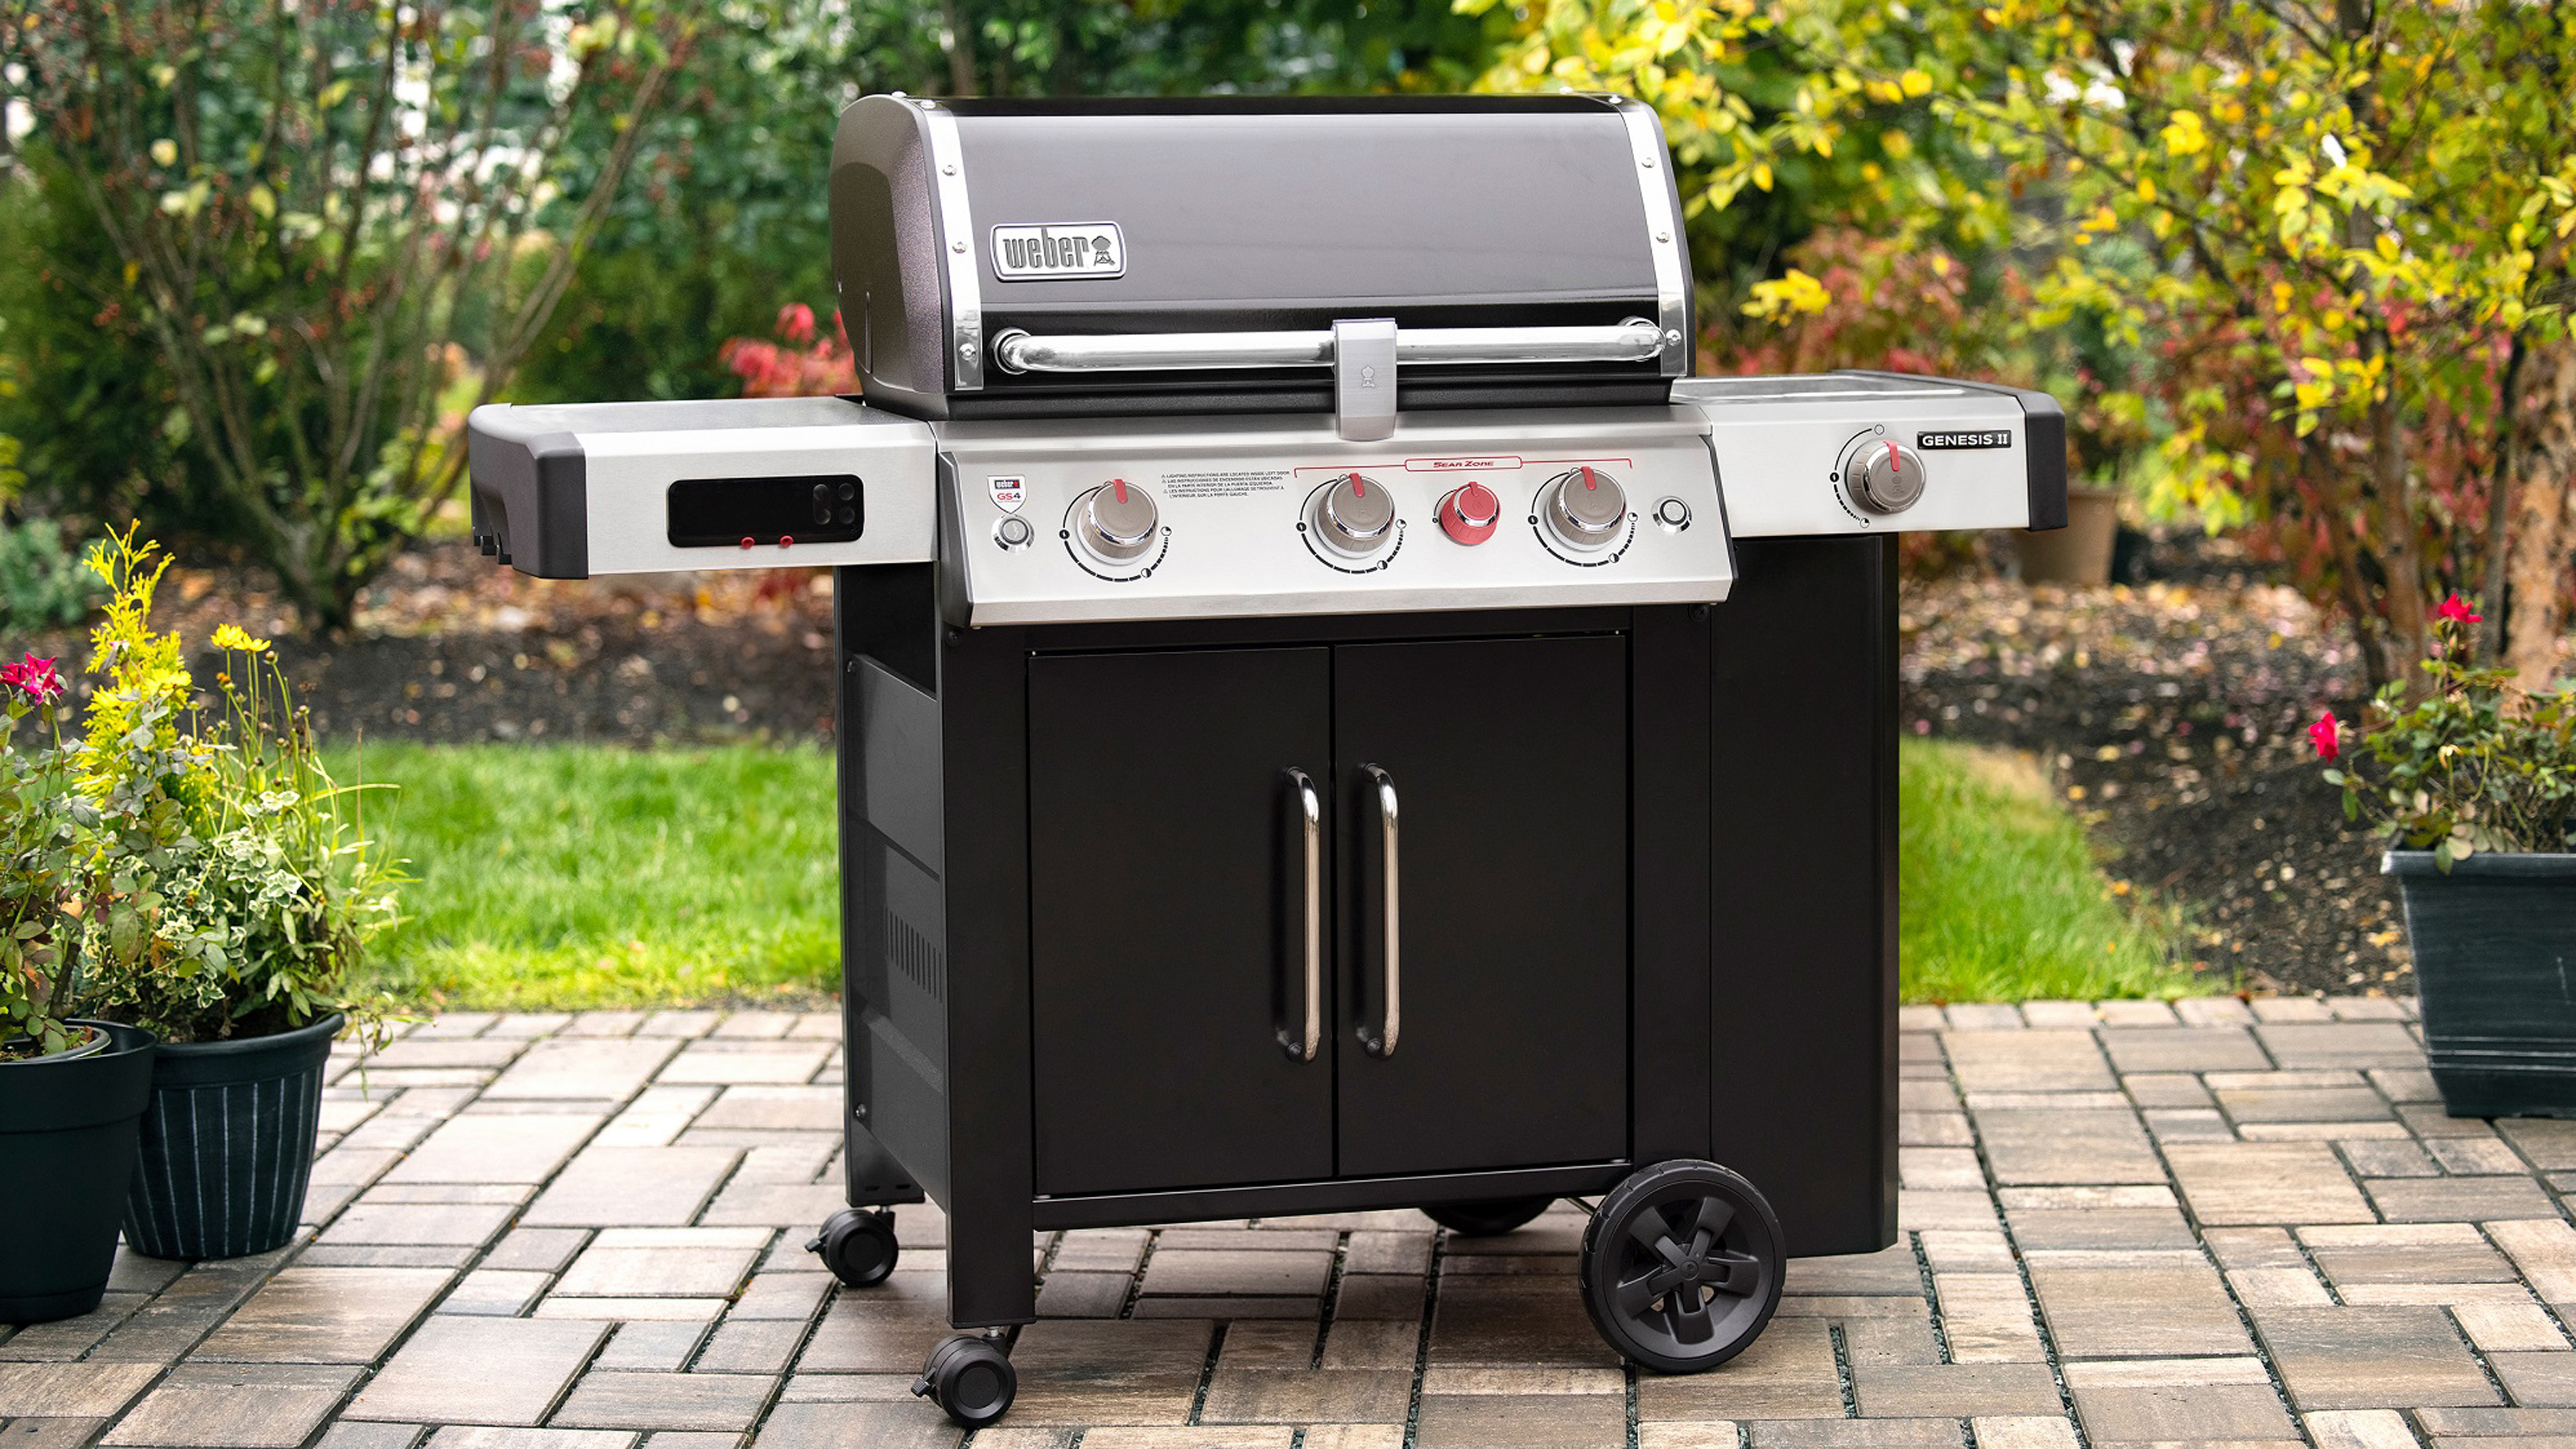 Weber Genesis EX-335 GBS barbecue a clever grill for serious chefs | Gardeningetc